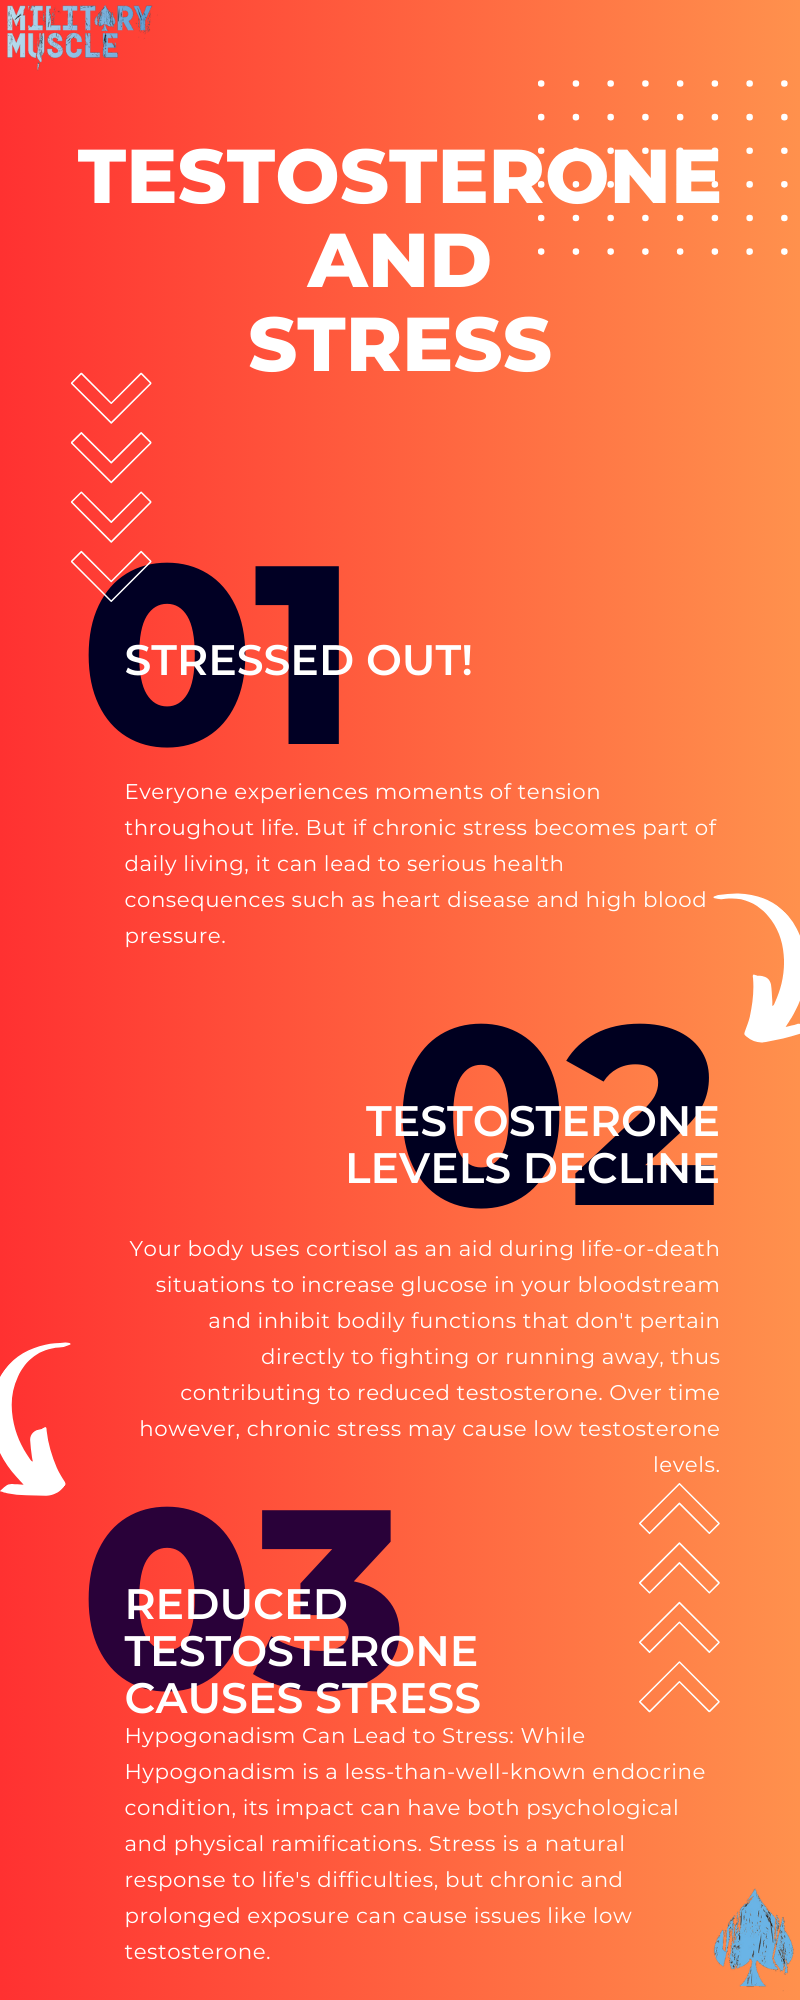 testosteone and stress cycle infographic